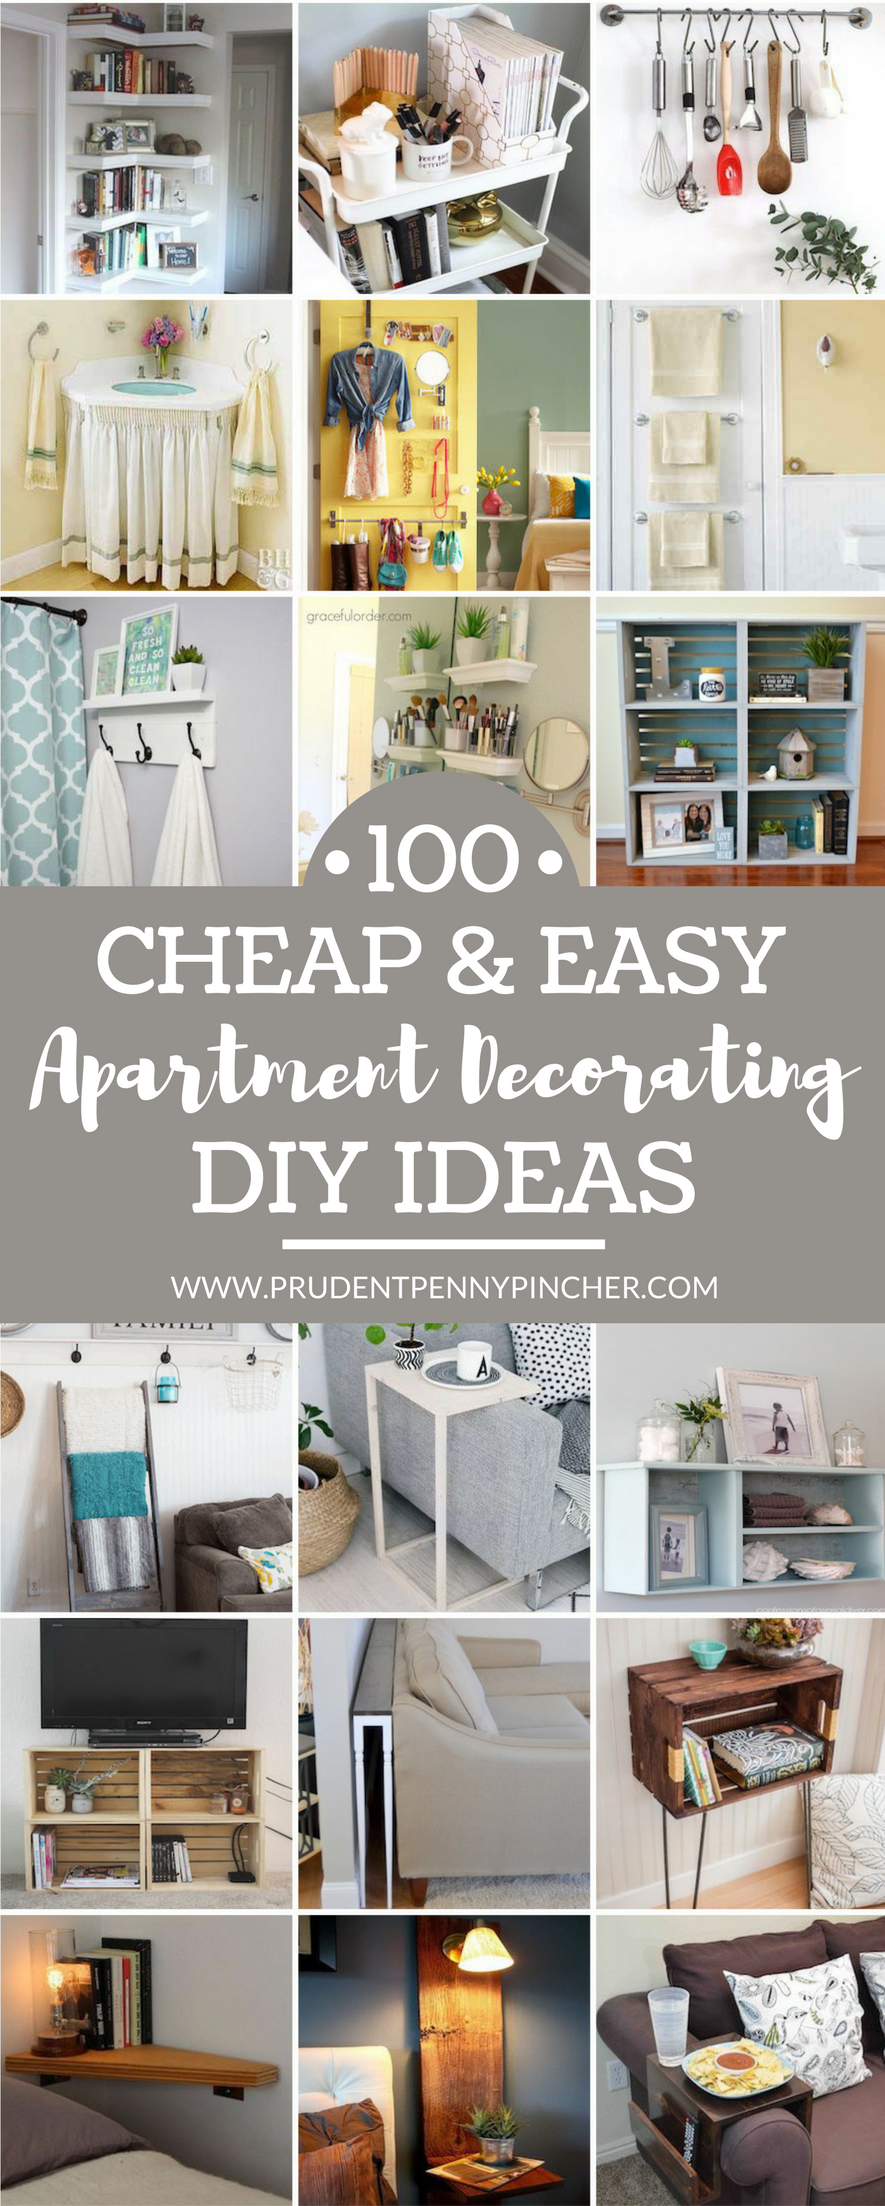 100 Cheap and Easy DIY Apartment Decorating Ideas - Prudent Penny Pincher